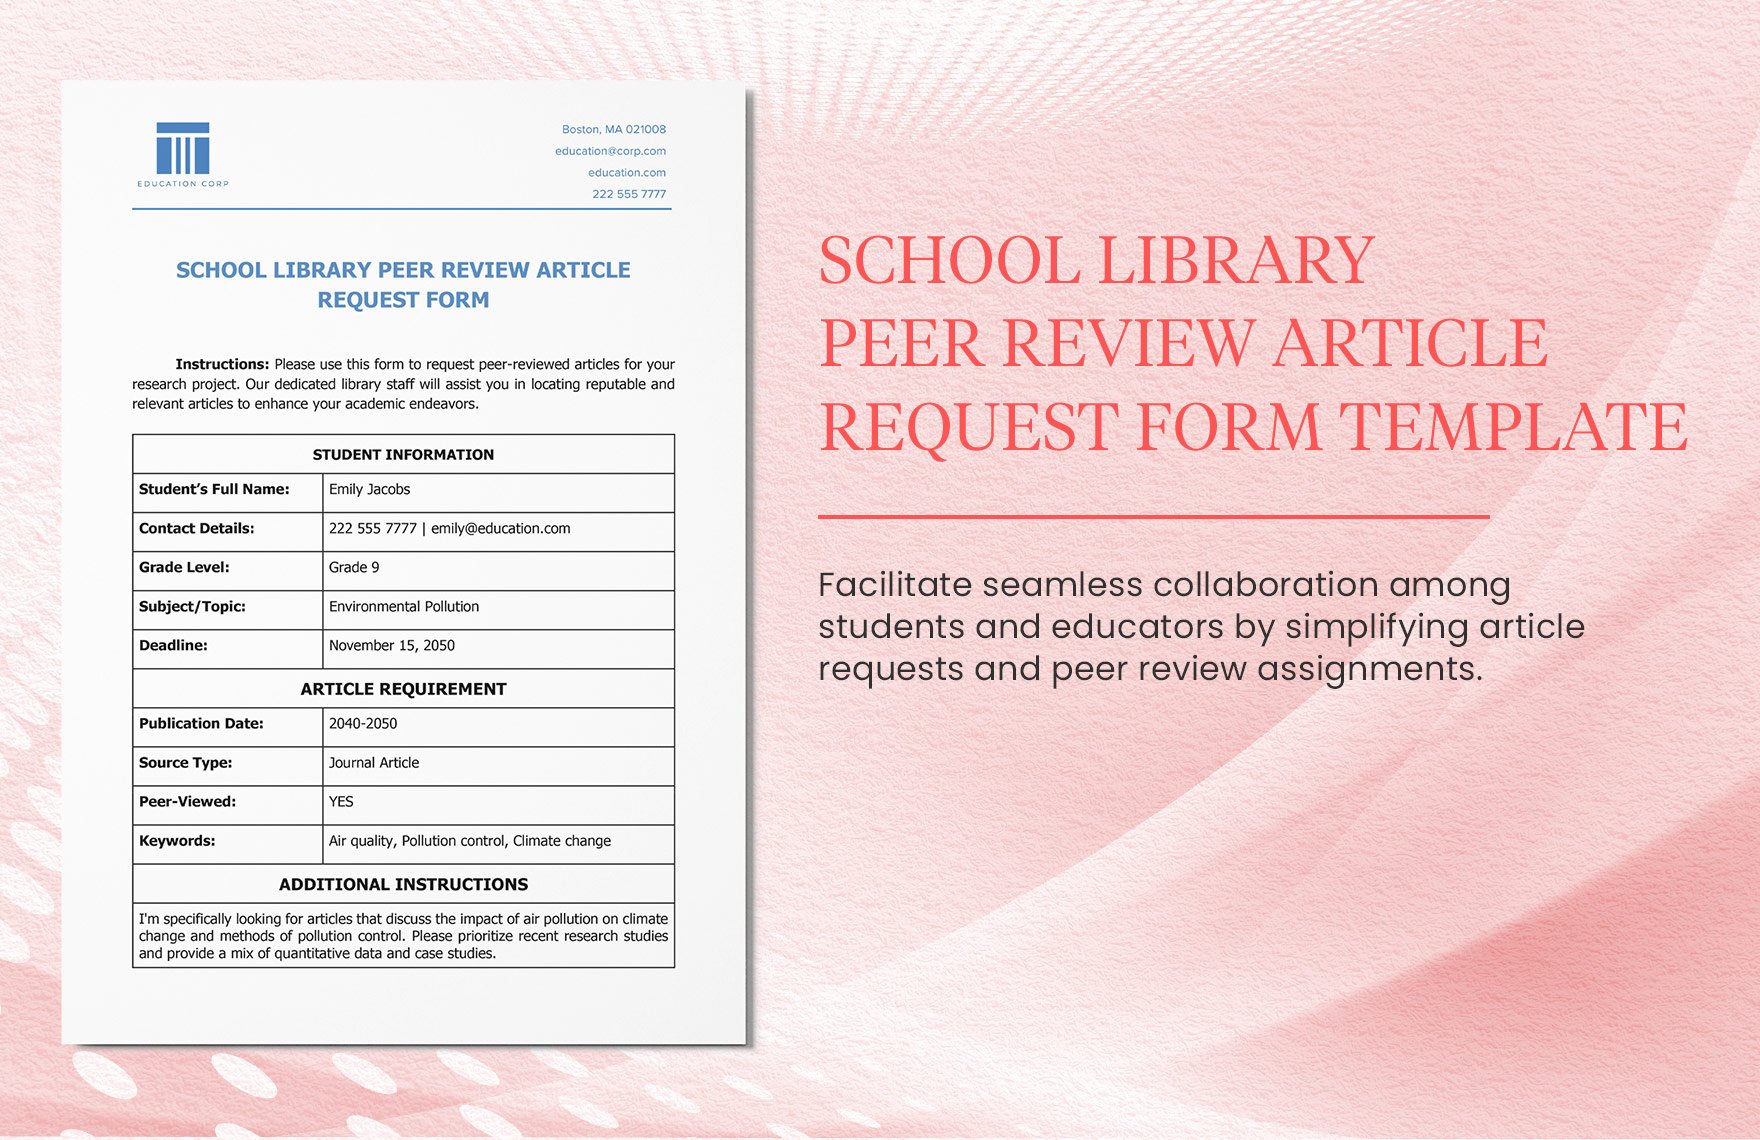 School Library Peer Review Article Request Form Template in Word, Google Docs, PDF